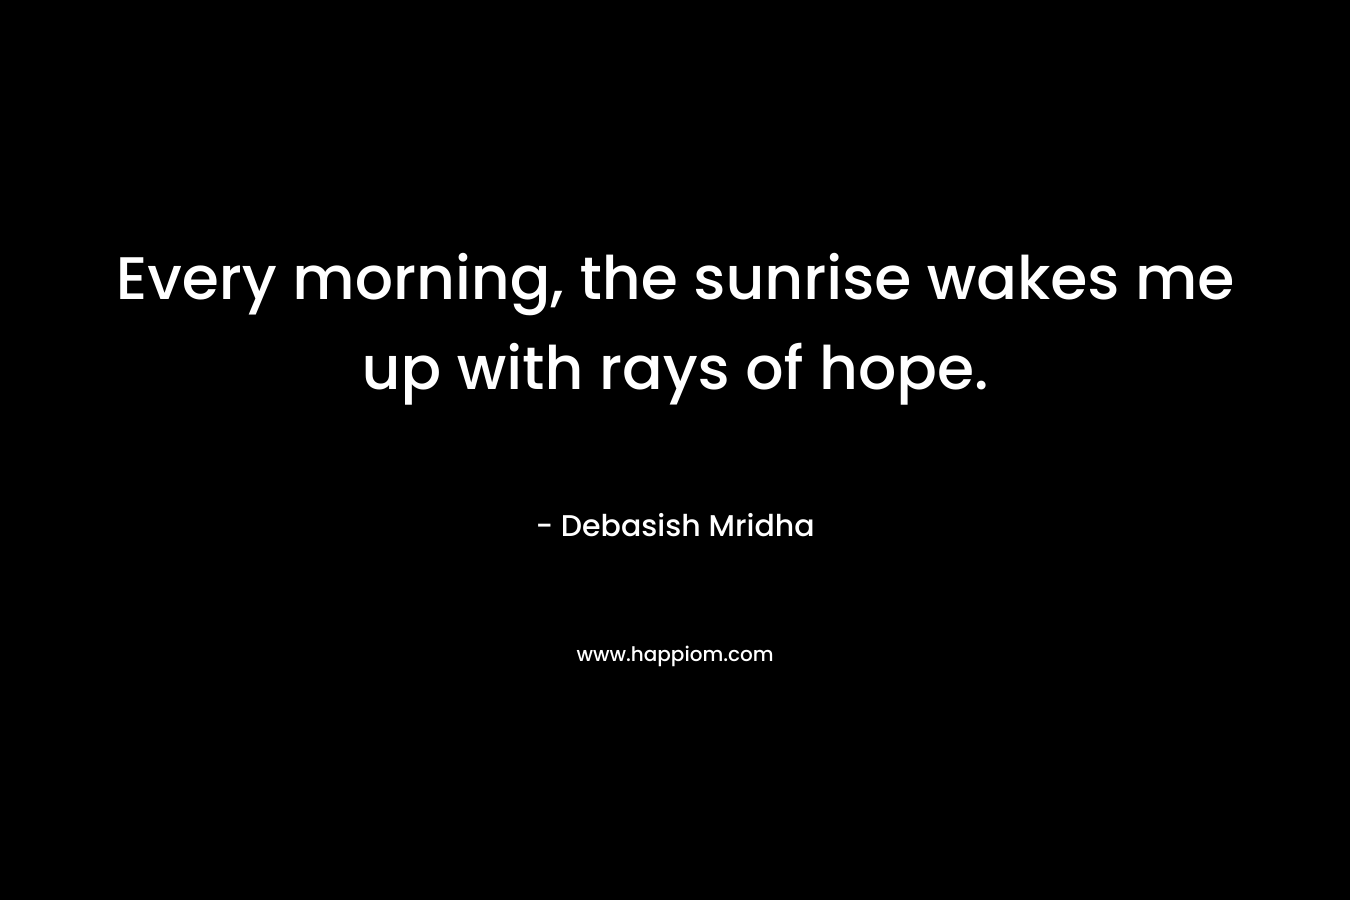 Every morning, the sunrise wakes me up with rays of hope.